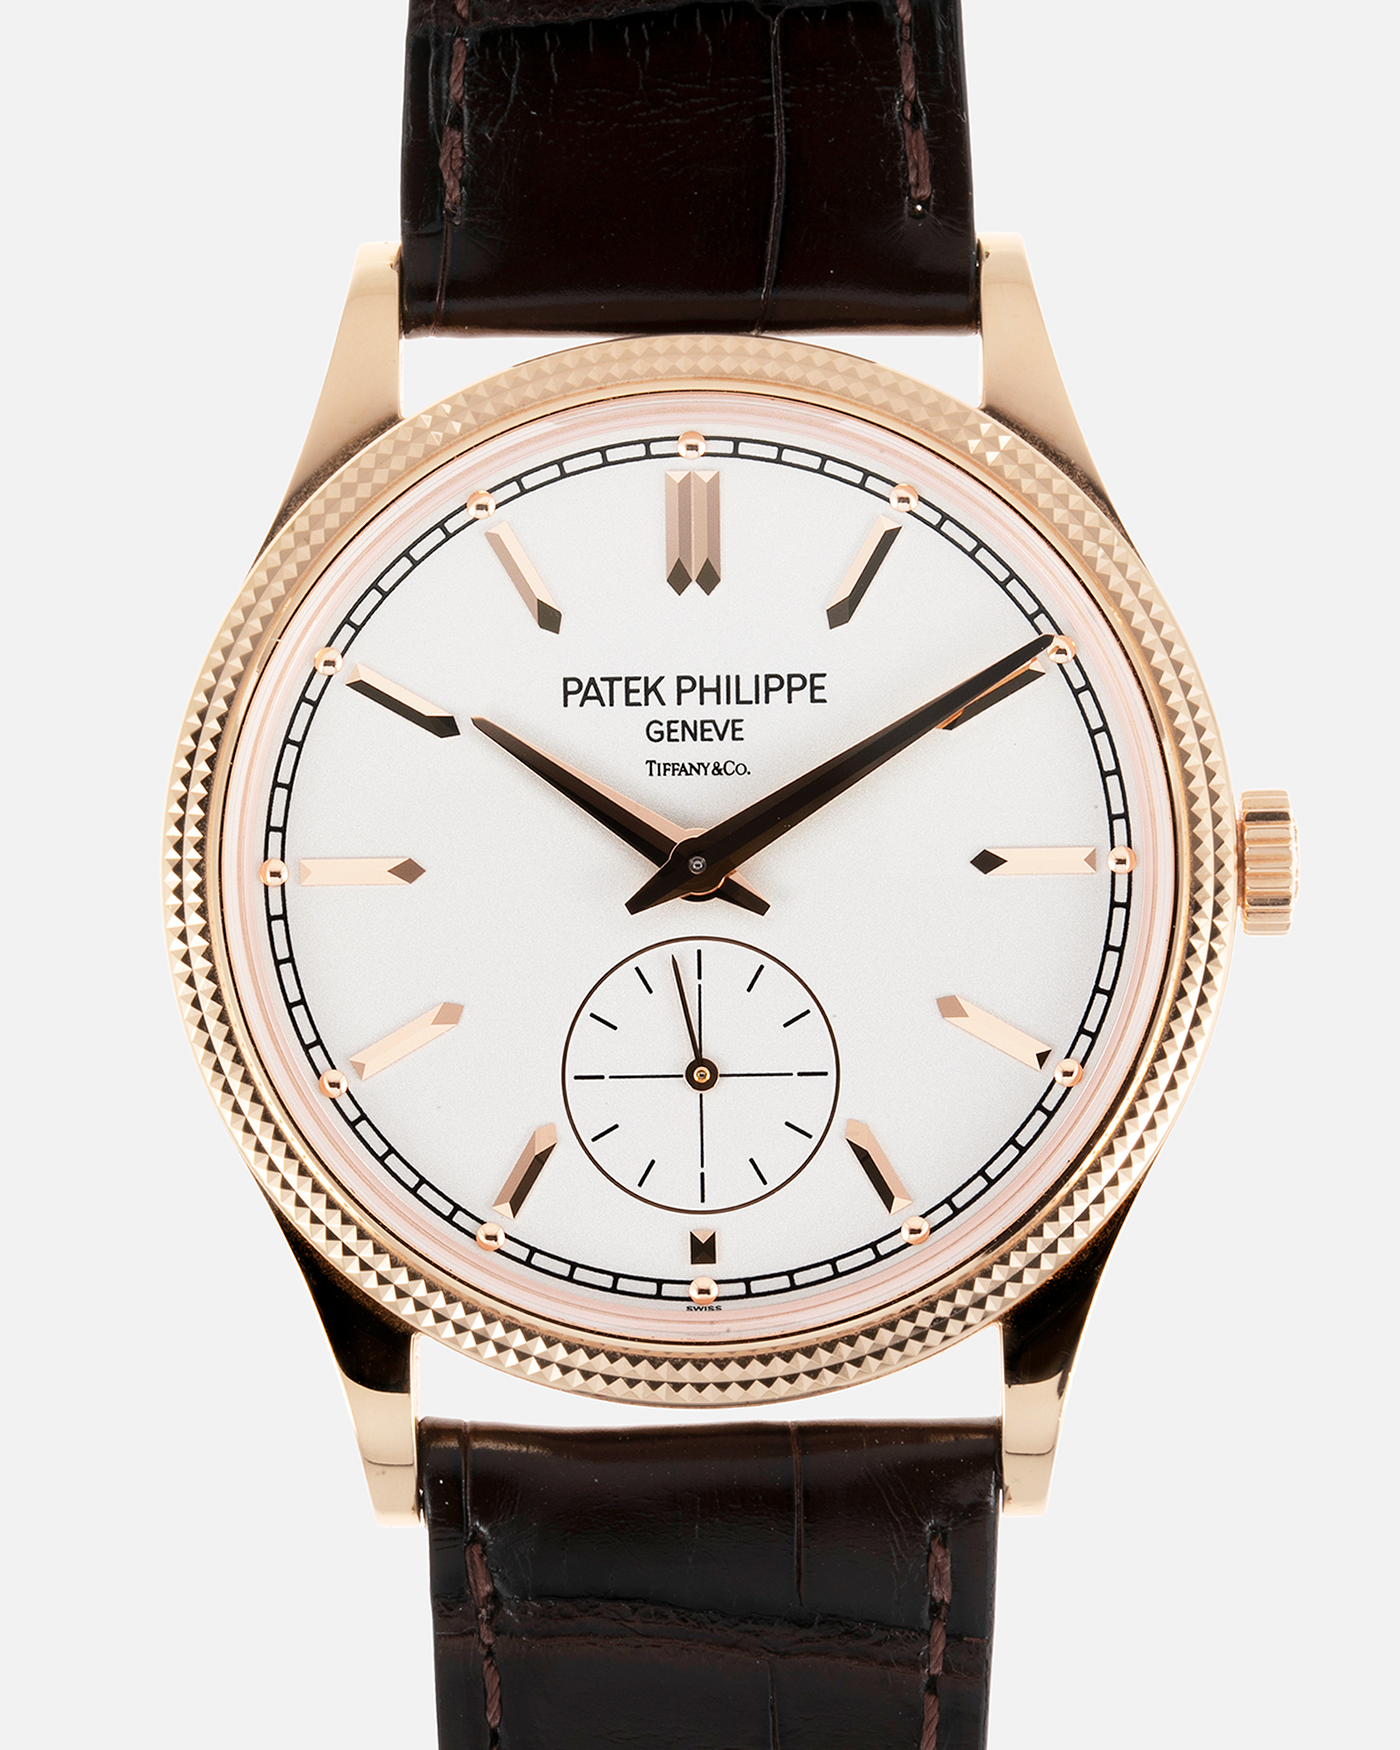 Brand: Patek Philippe Year: 2022 Model: Calatrava Reference: 6119R Material: 18-carat Rose Gold Movement: Patek Philippe Cal. 30-255, Manual-Wind Case Diameter: 39mm x 8.08mm Strap: Patek Philippe Chocolate Brown Alligator Leather with Signed 18-carat Rose Gold Tang Buckle